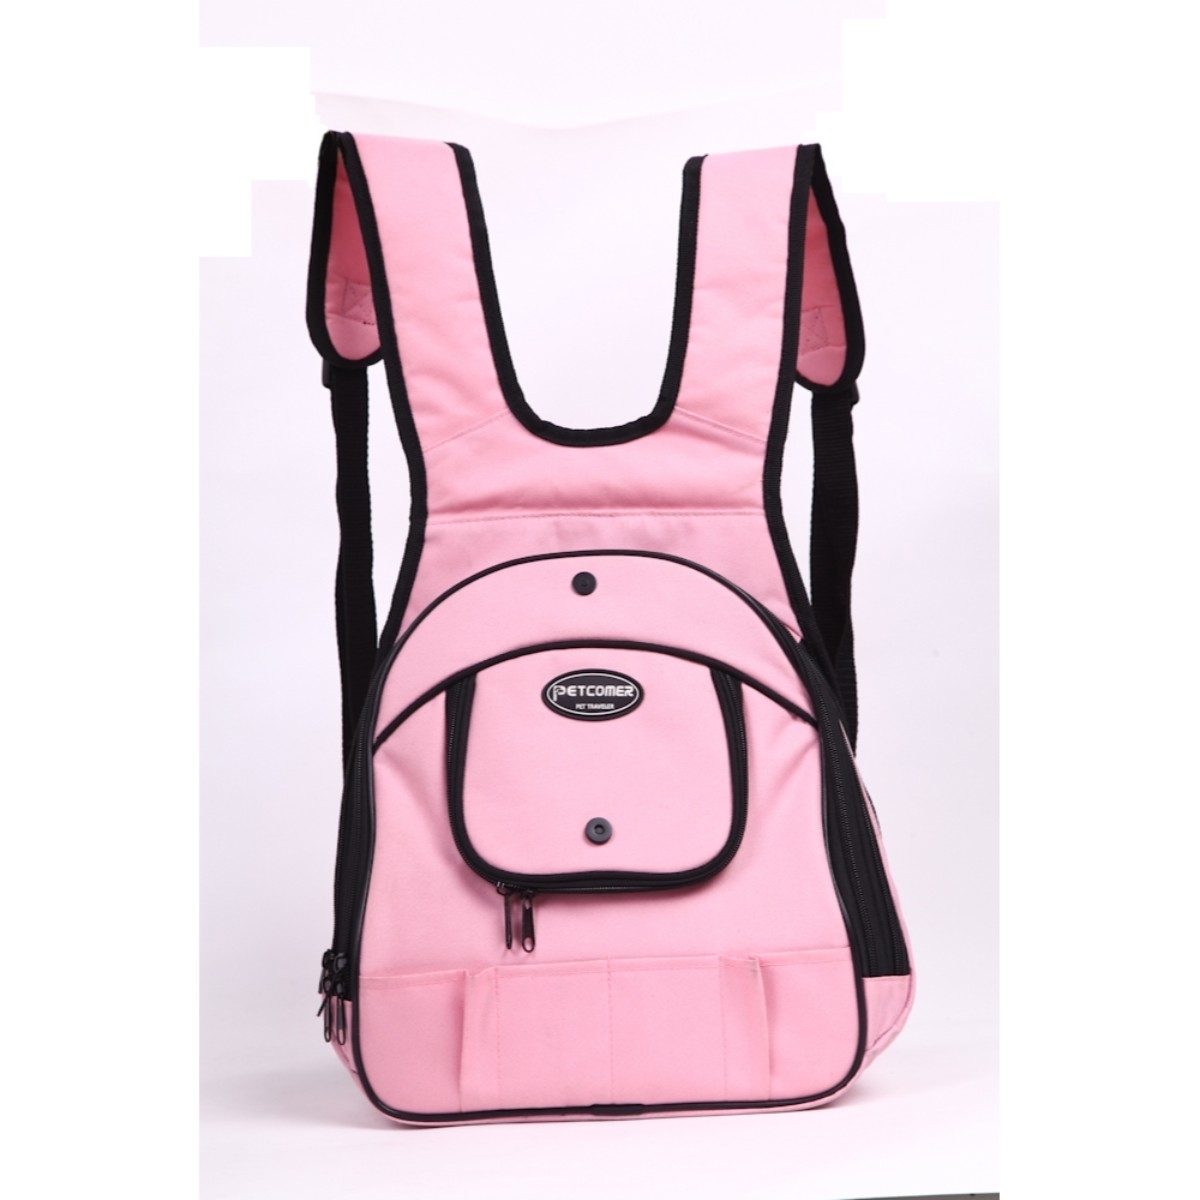 MKF Collection By Mia K. Handbag Doggy Boo Front Dog Carrier For Small Dogs - Pink